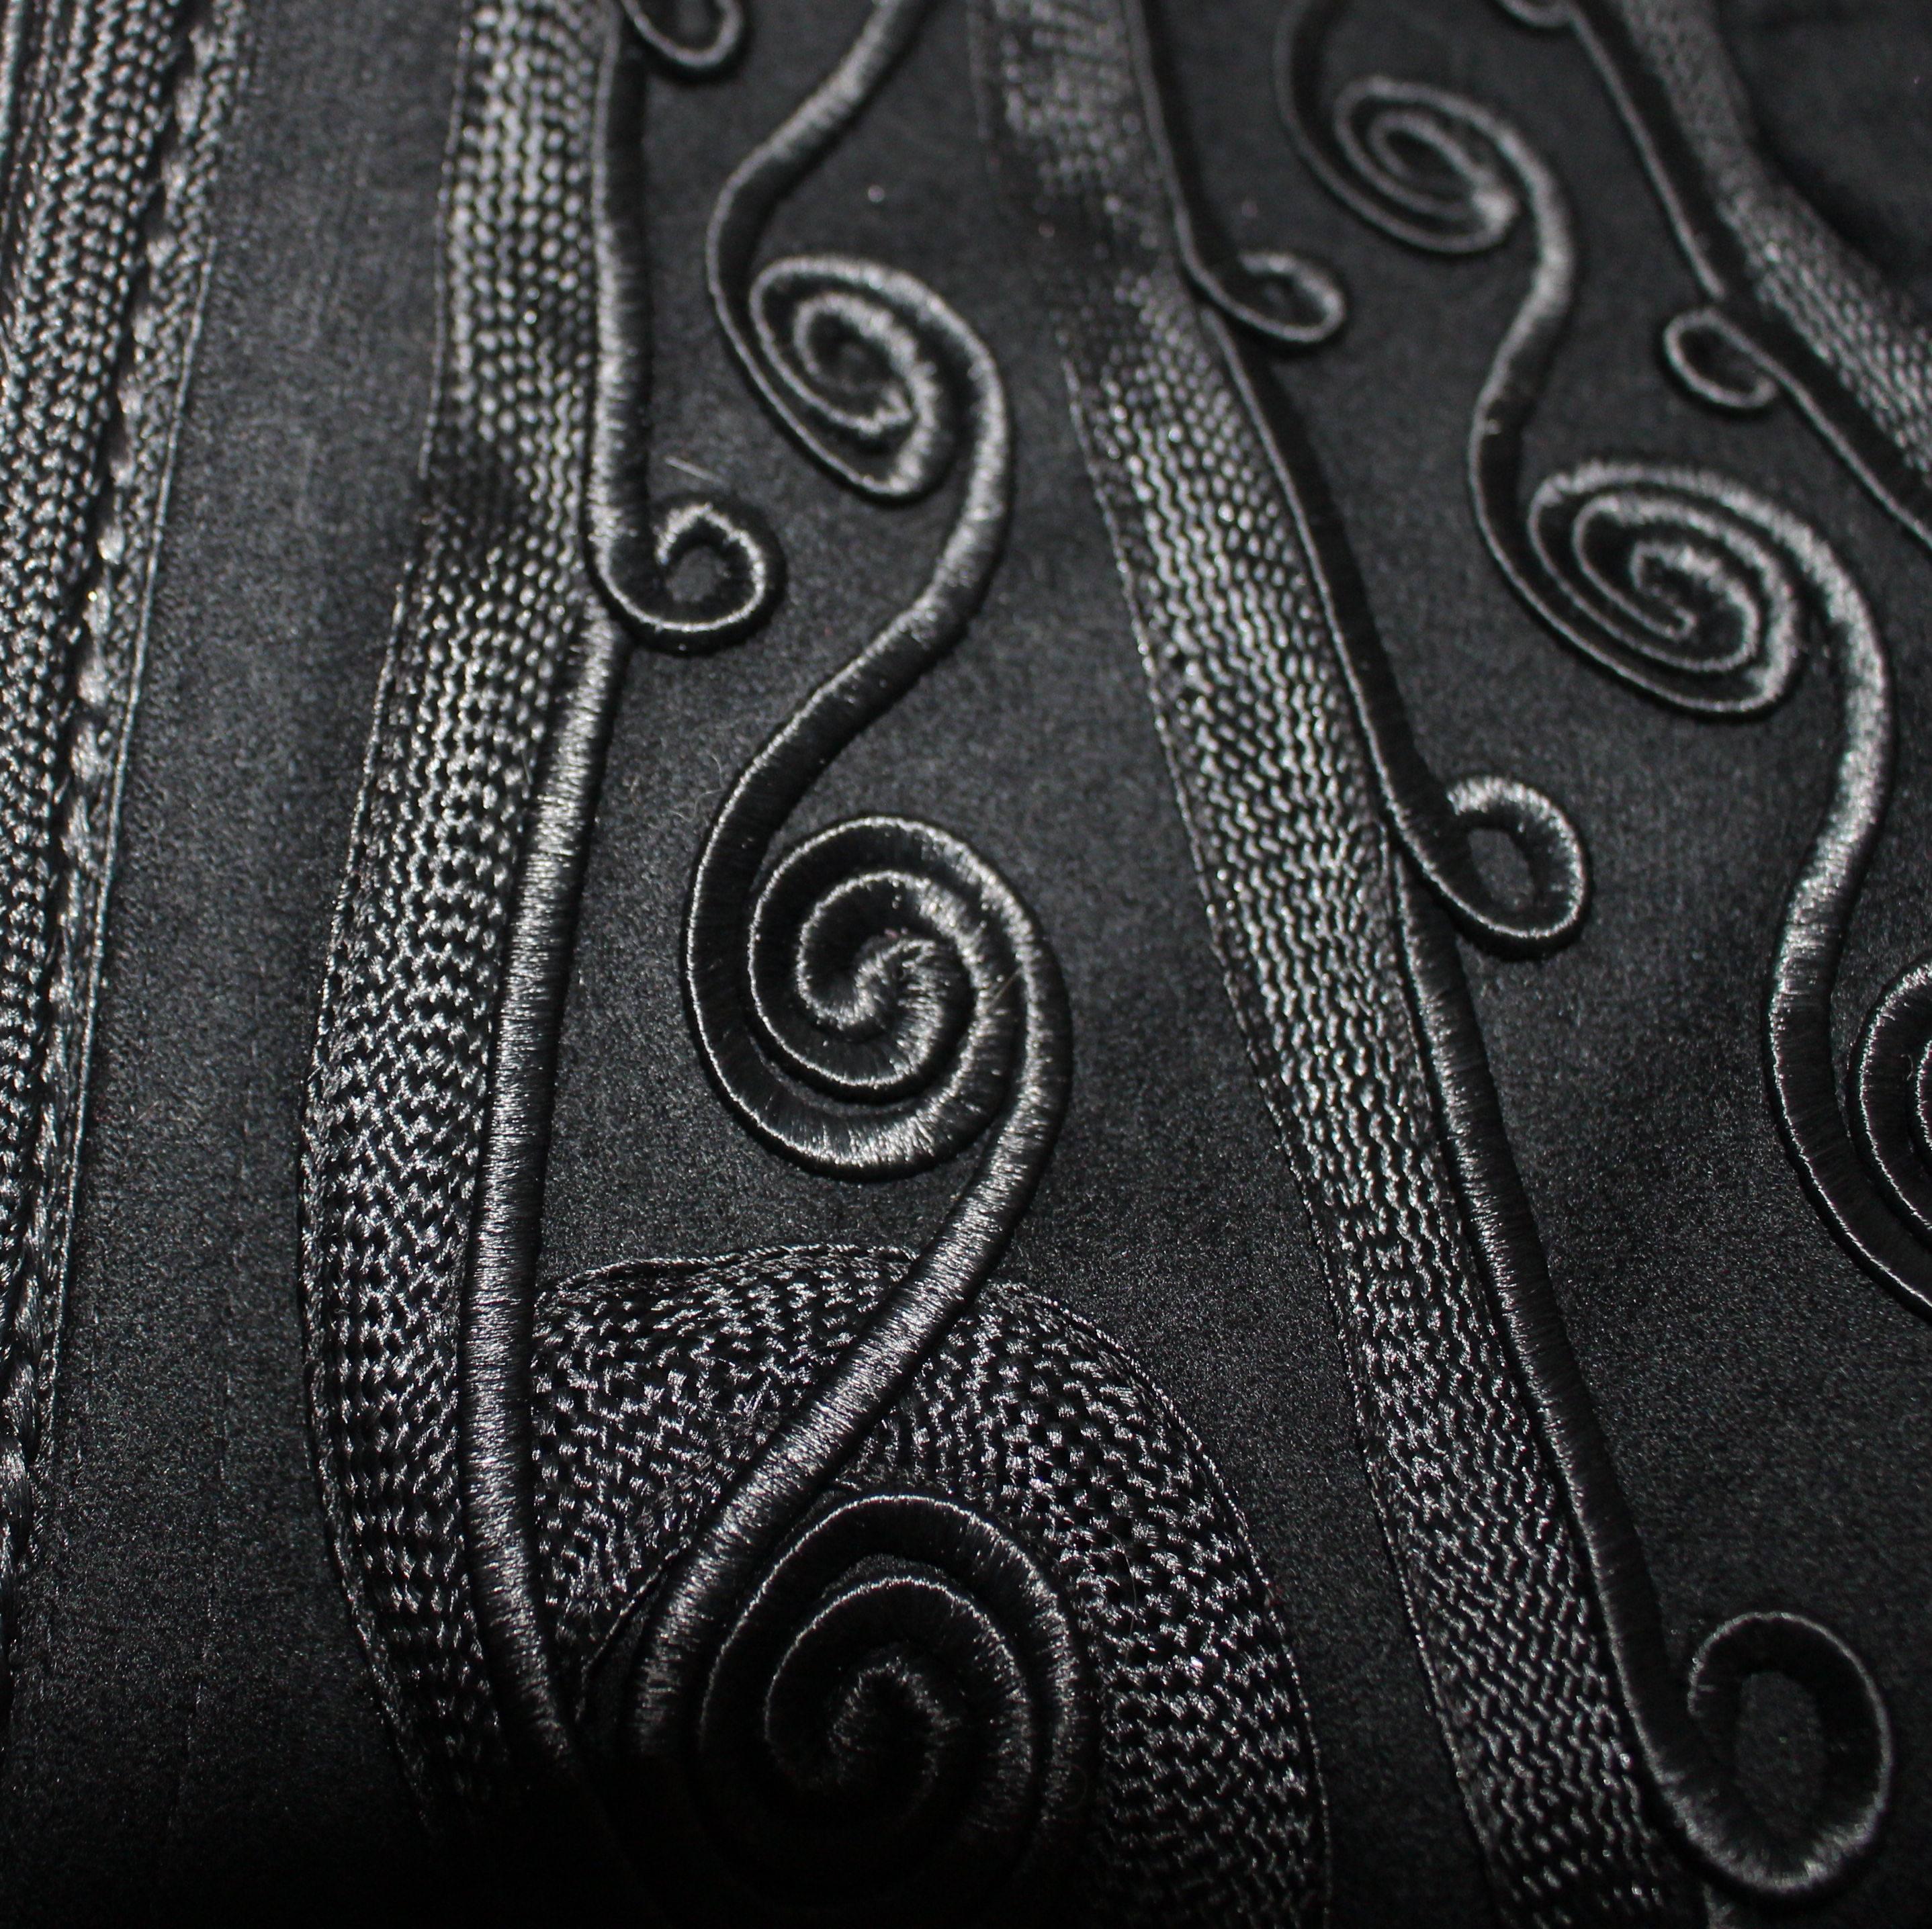 Edwardian Black Coat Elaborately Trimmed in Silk and Satin  In Excellent Condition For Sale In San Francisco, CA